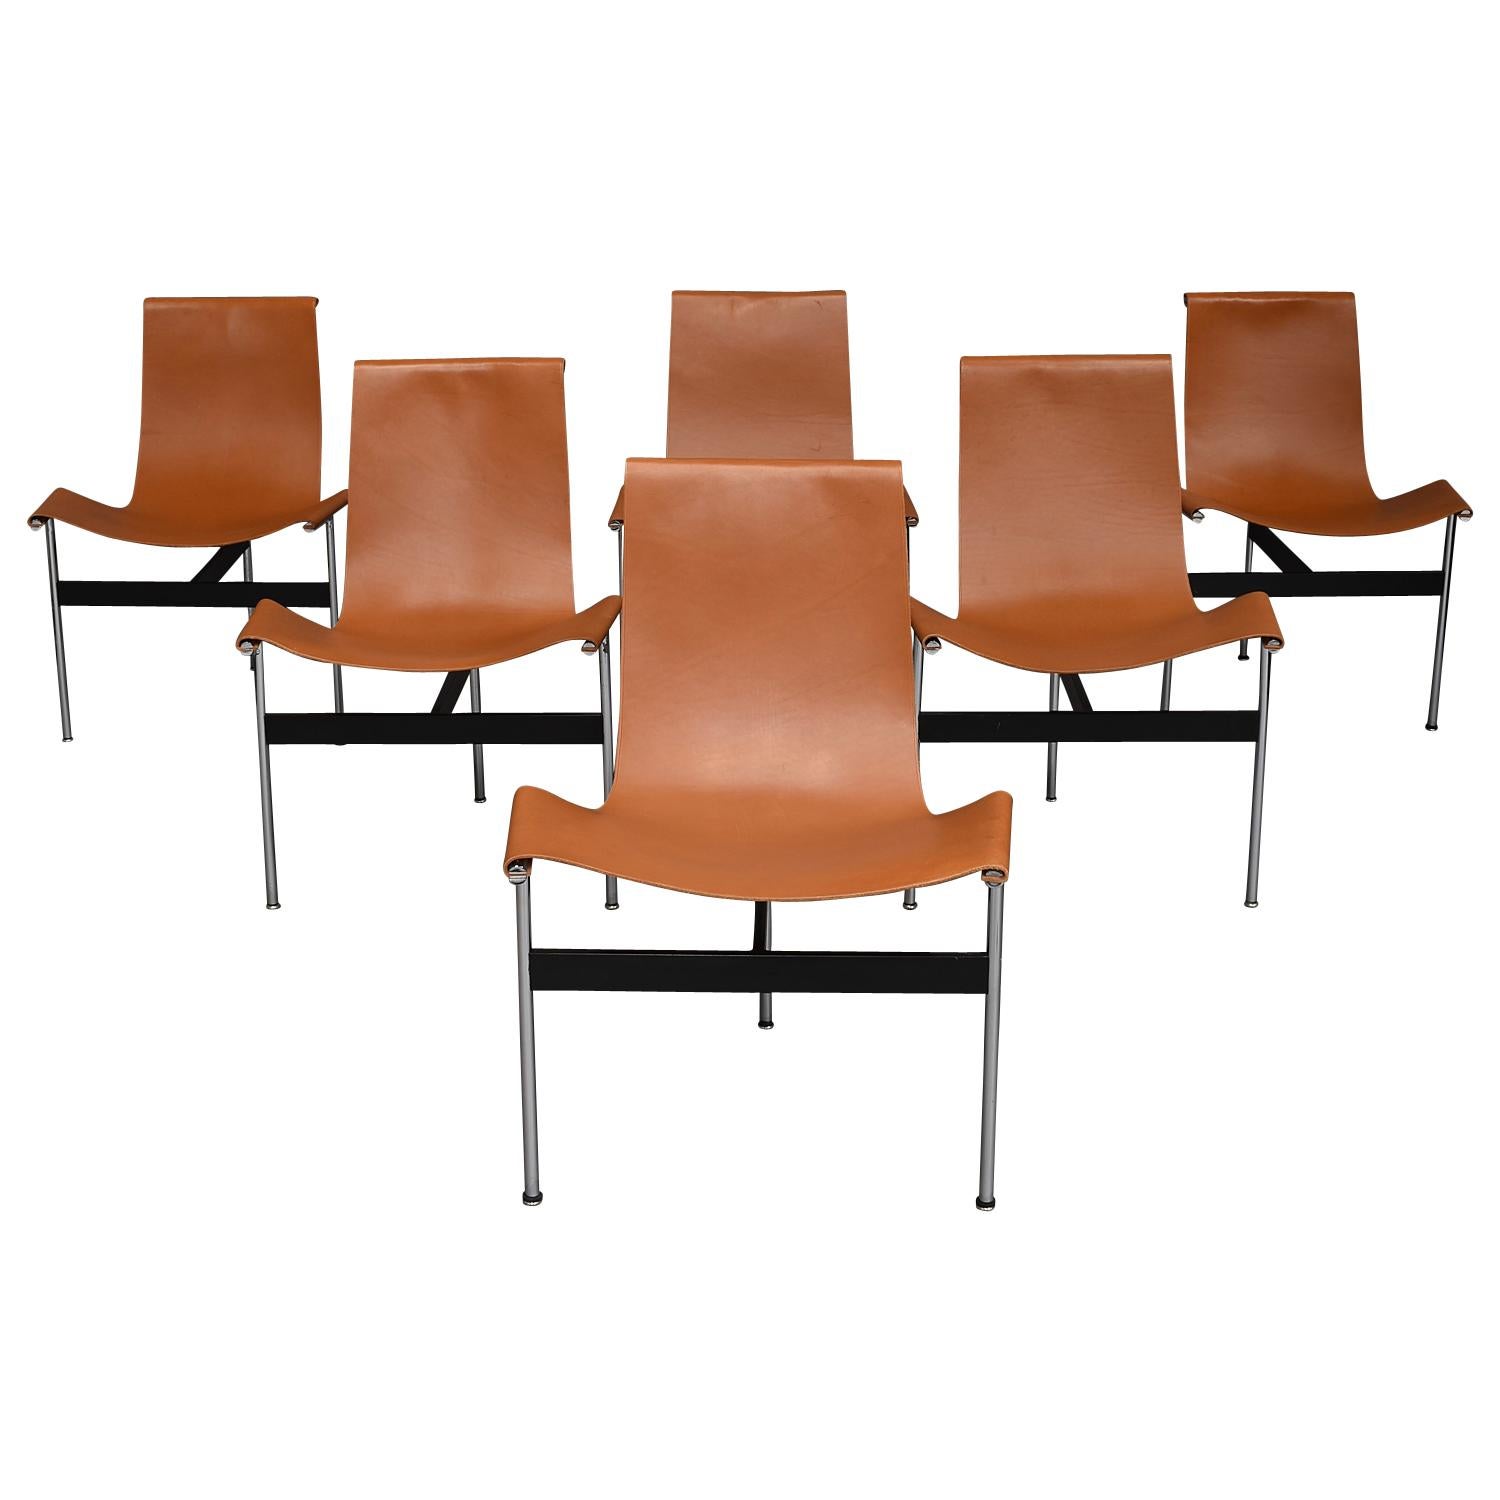 Amazing set of six three legged T-chairs by William Katavolos, Dougles Kelly and Ross Littell.
All chairs are in original and very good and beautiful condition. The leather has minor signs of use and age. Some seats have stains but nothing